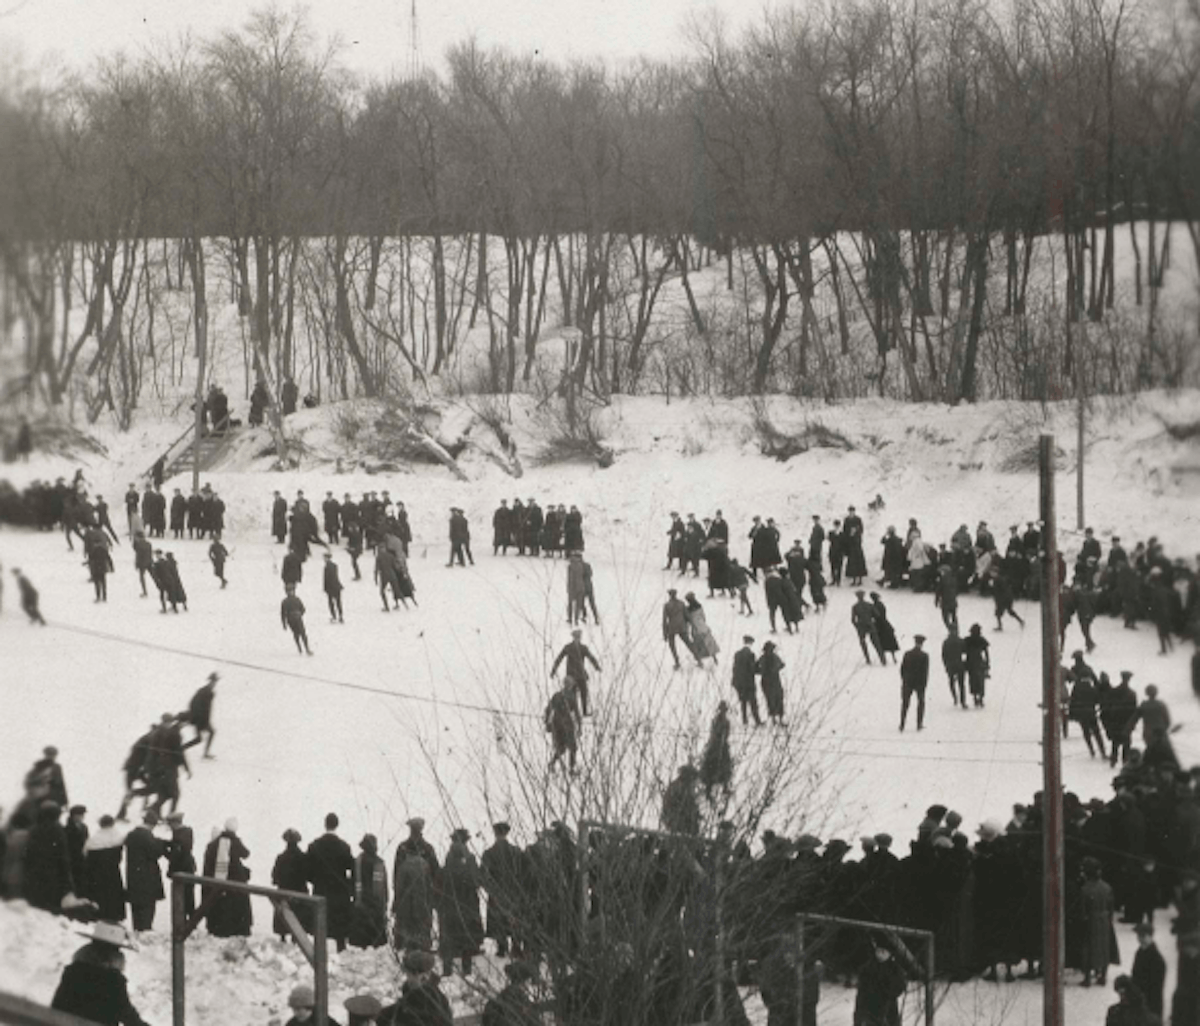 Groups of people gathered on a snowy landscape, many standing on a frozen body of water.